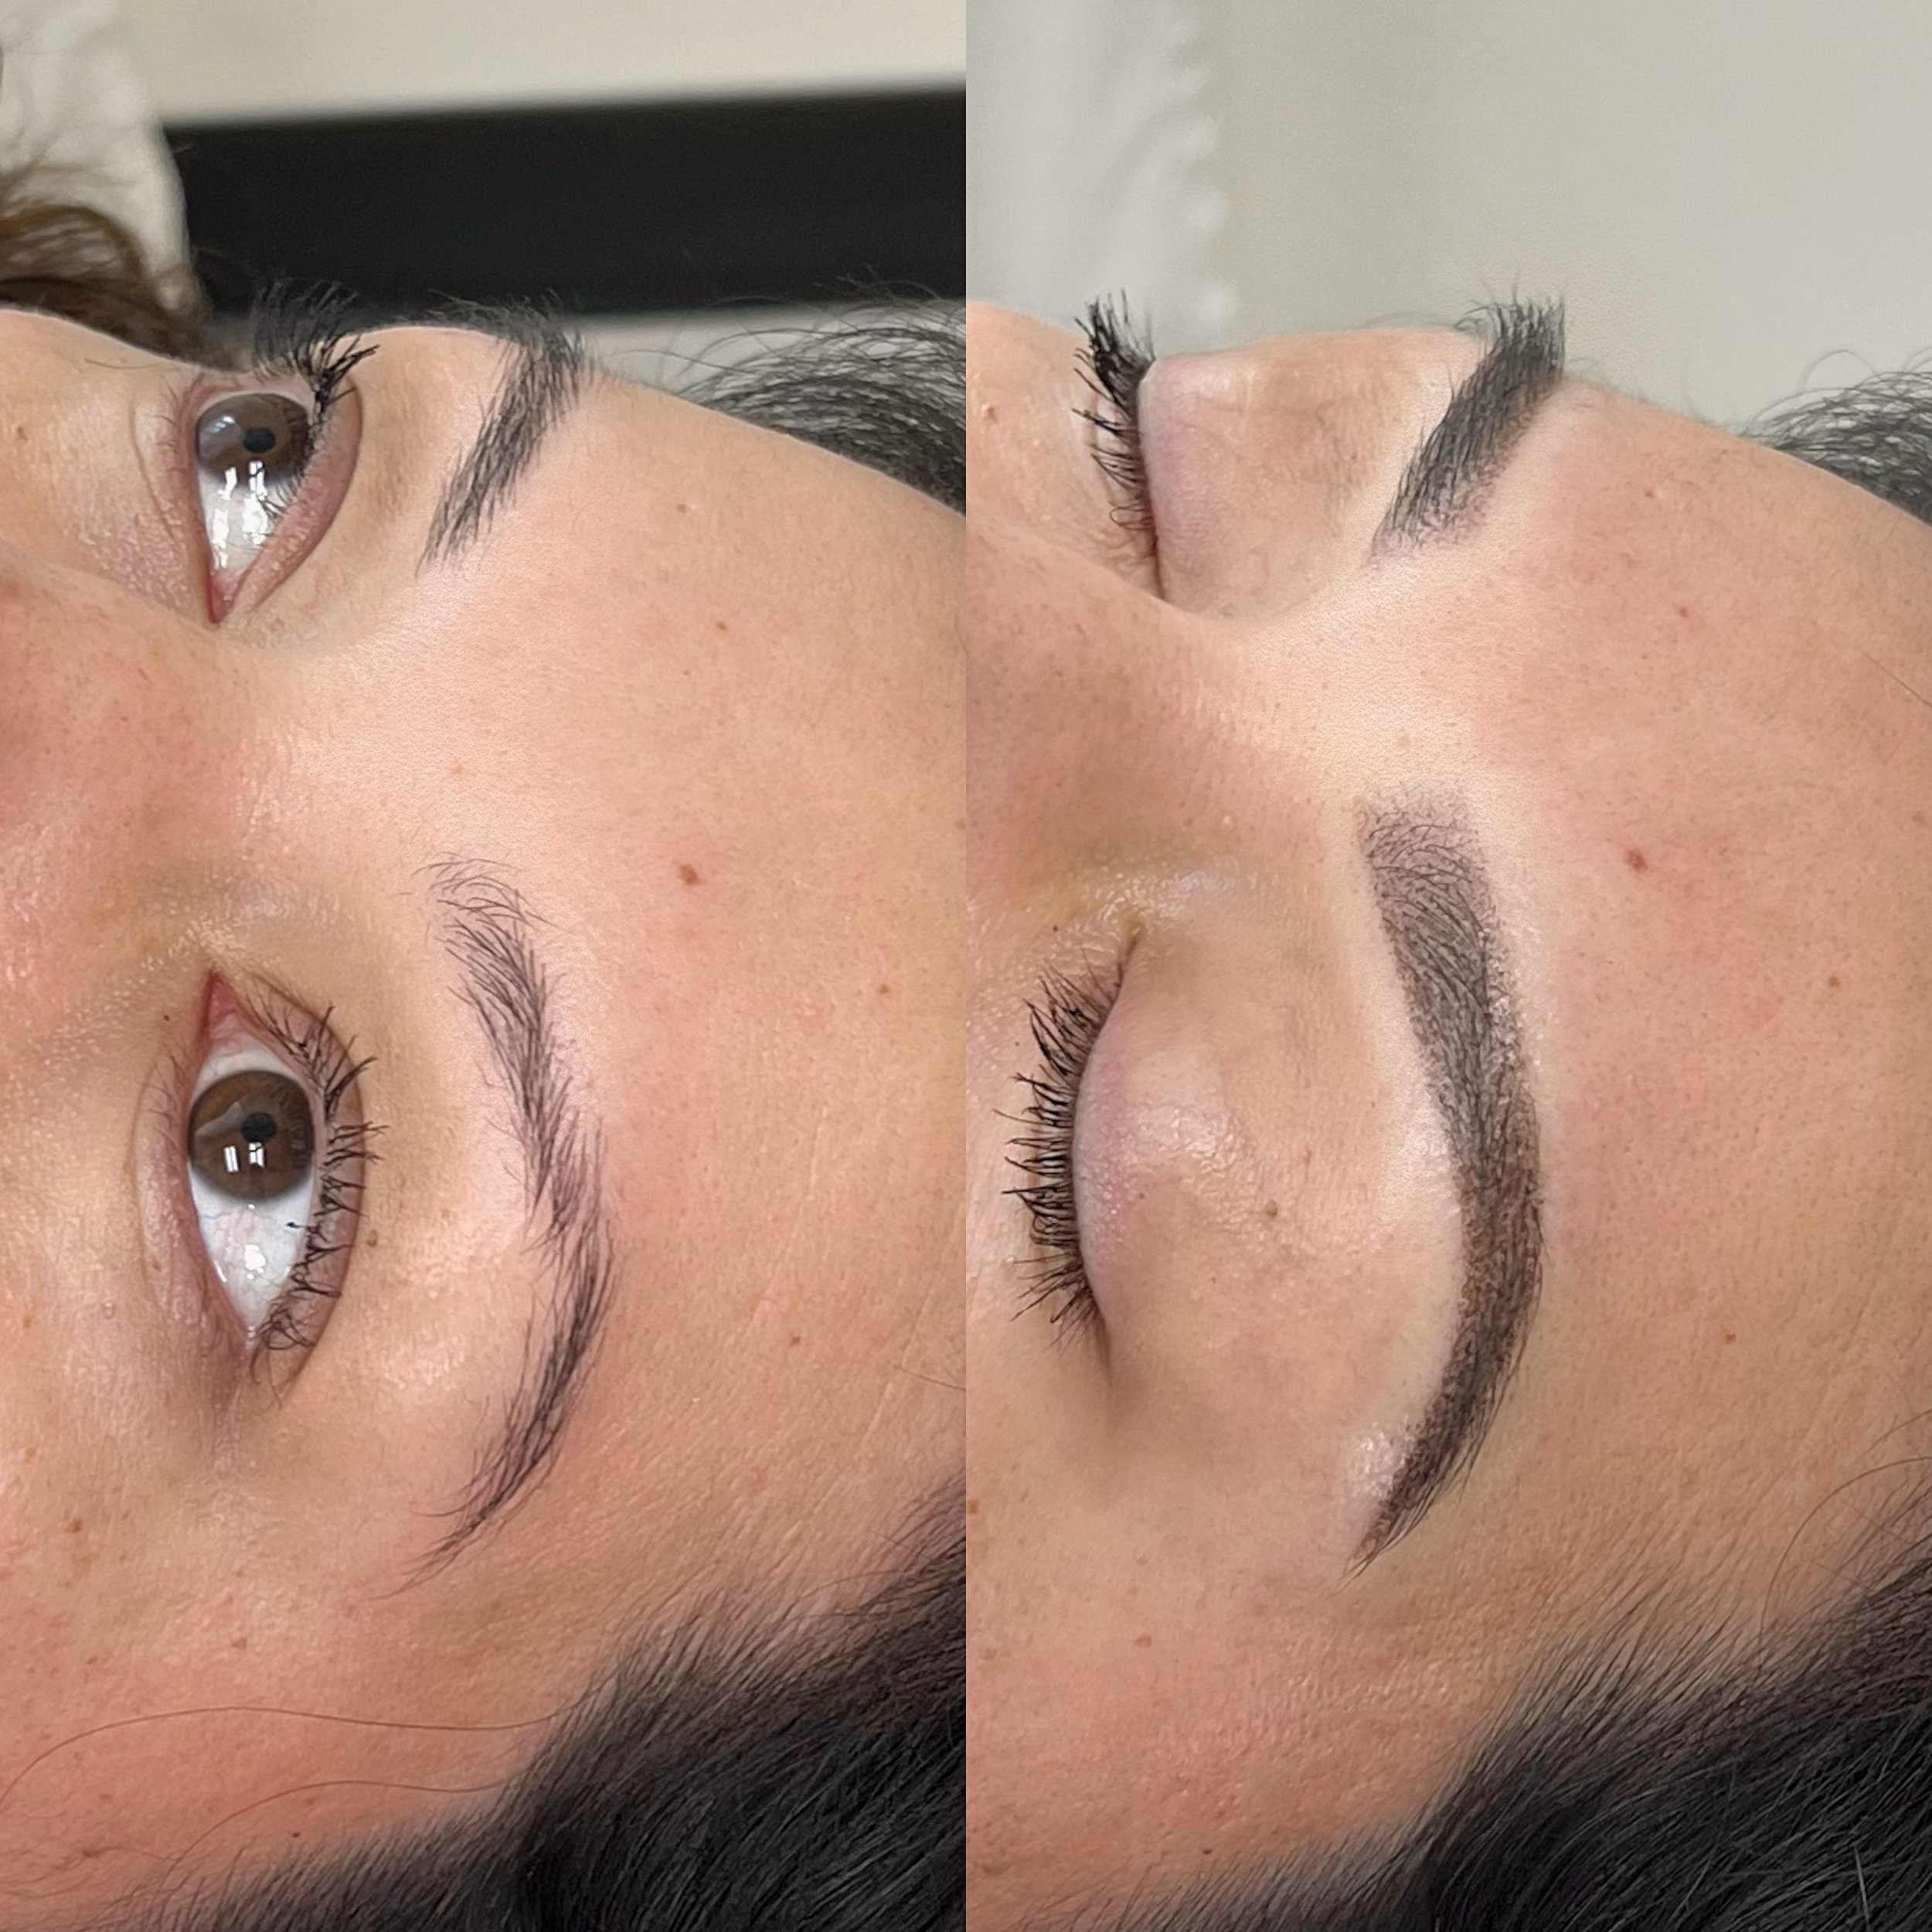 Concerns: patchy/sparse areas and hair growing in all different directions
Solution: powder brows
Reason: microblading cannot fully camouflage the different growth patterns like powder can, powder will always be a cleaner look when dealing with these